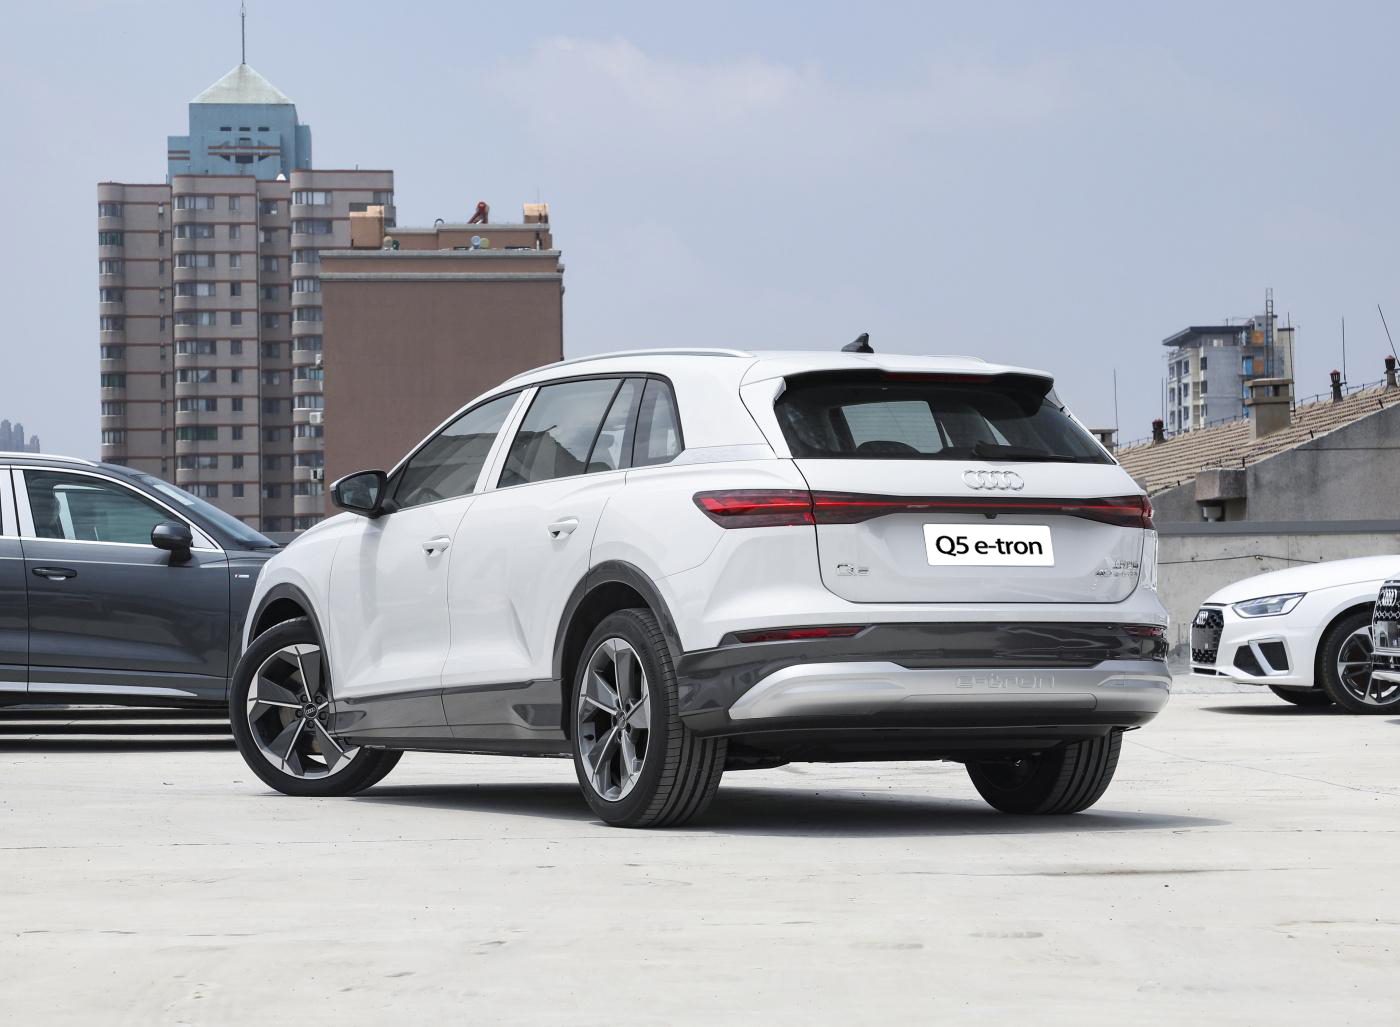 2024 Audi Q5 E-Tron Large Electric SUV Support Export Trade in China - Audi - 4